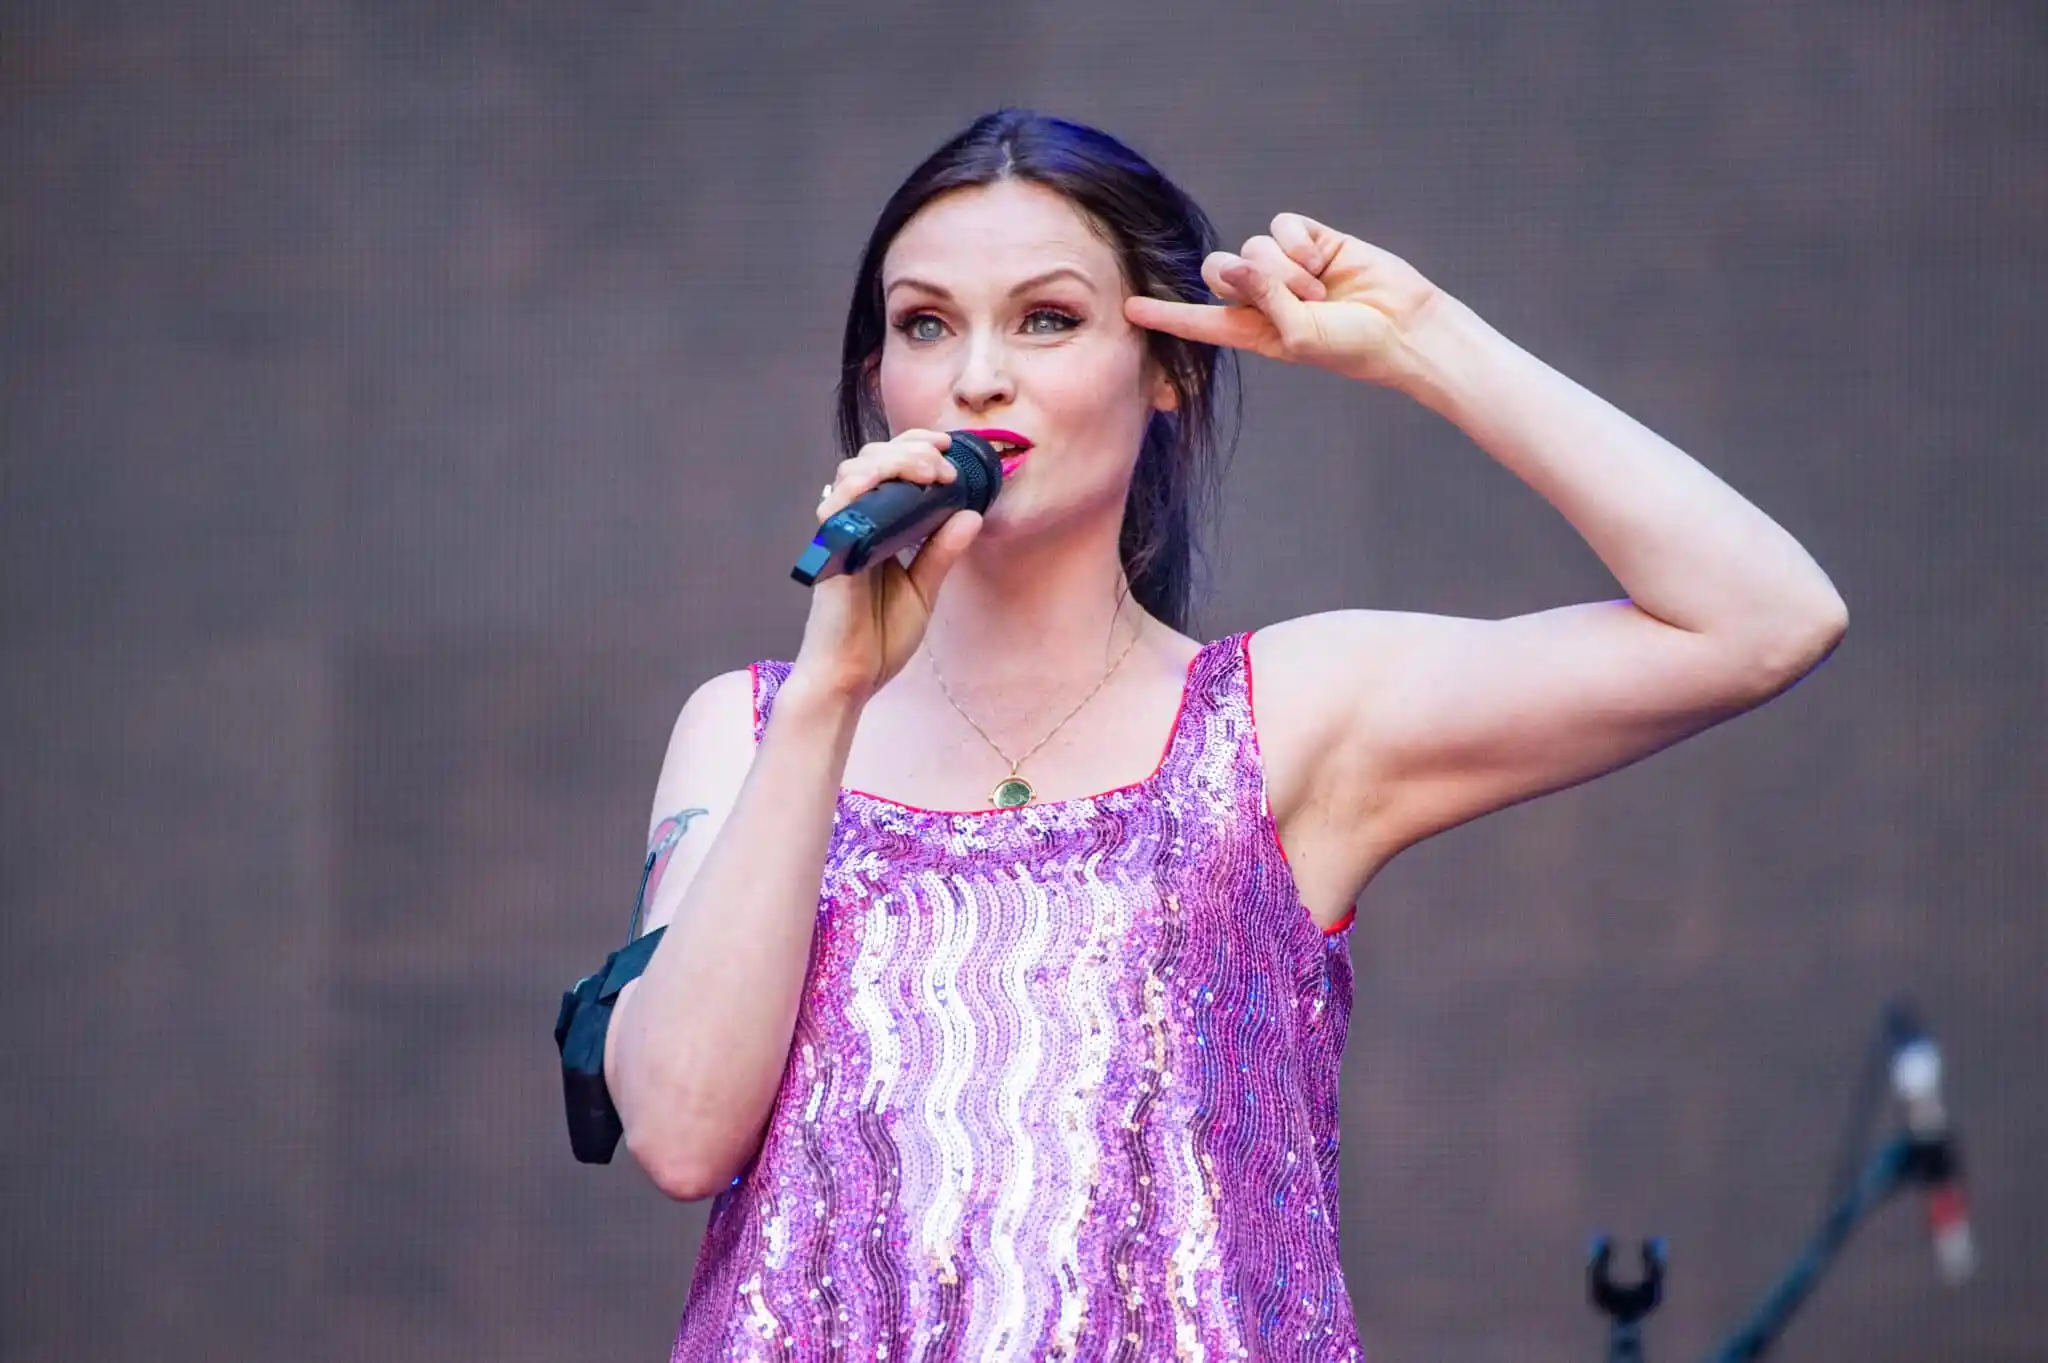 Sophie Ellis-Bextor reveals powerful way gay fans have helped her: ‘It’s an incredible thing’